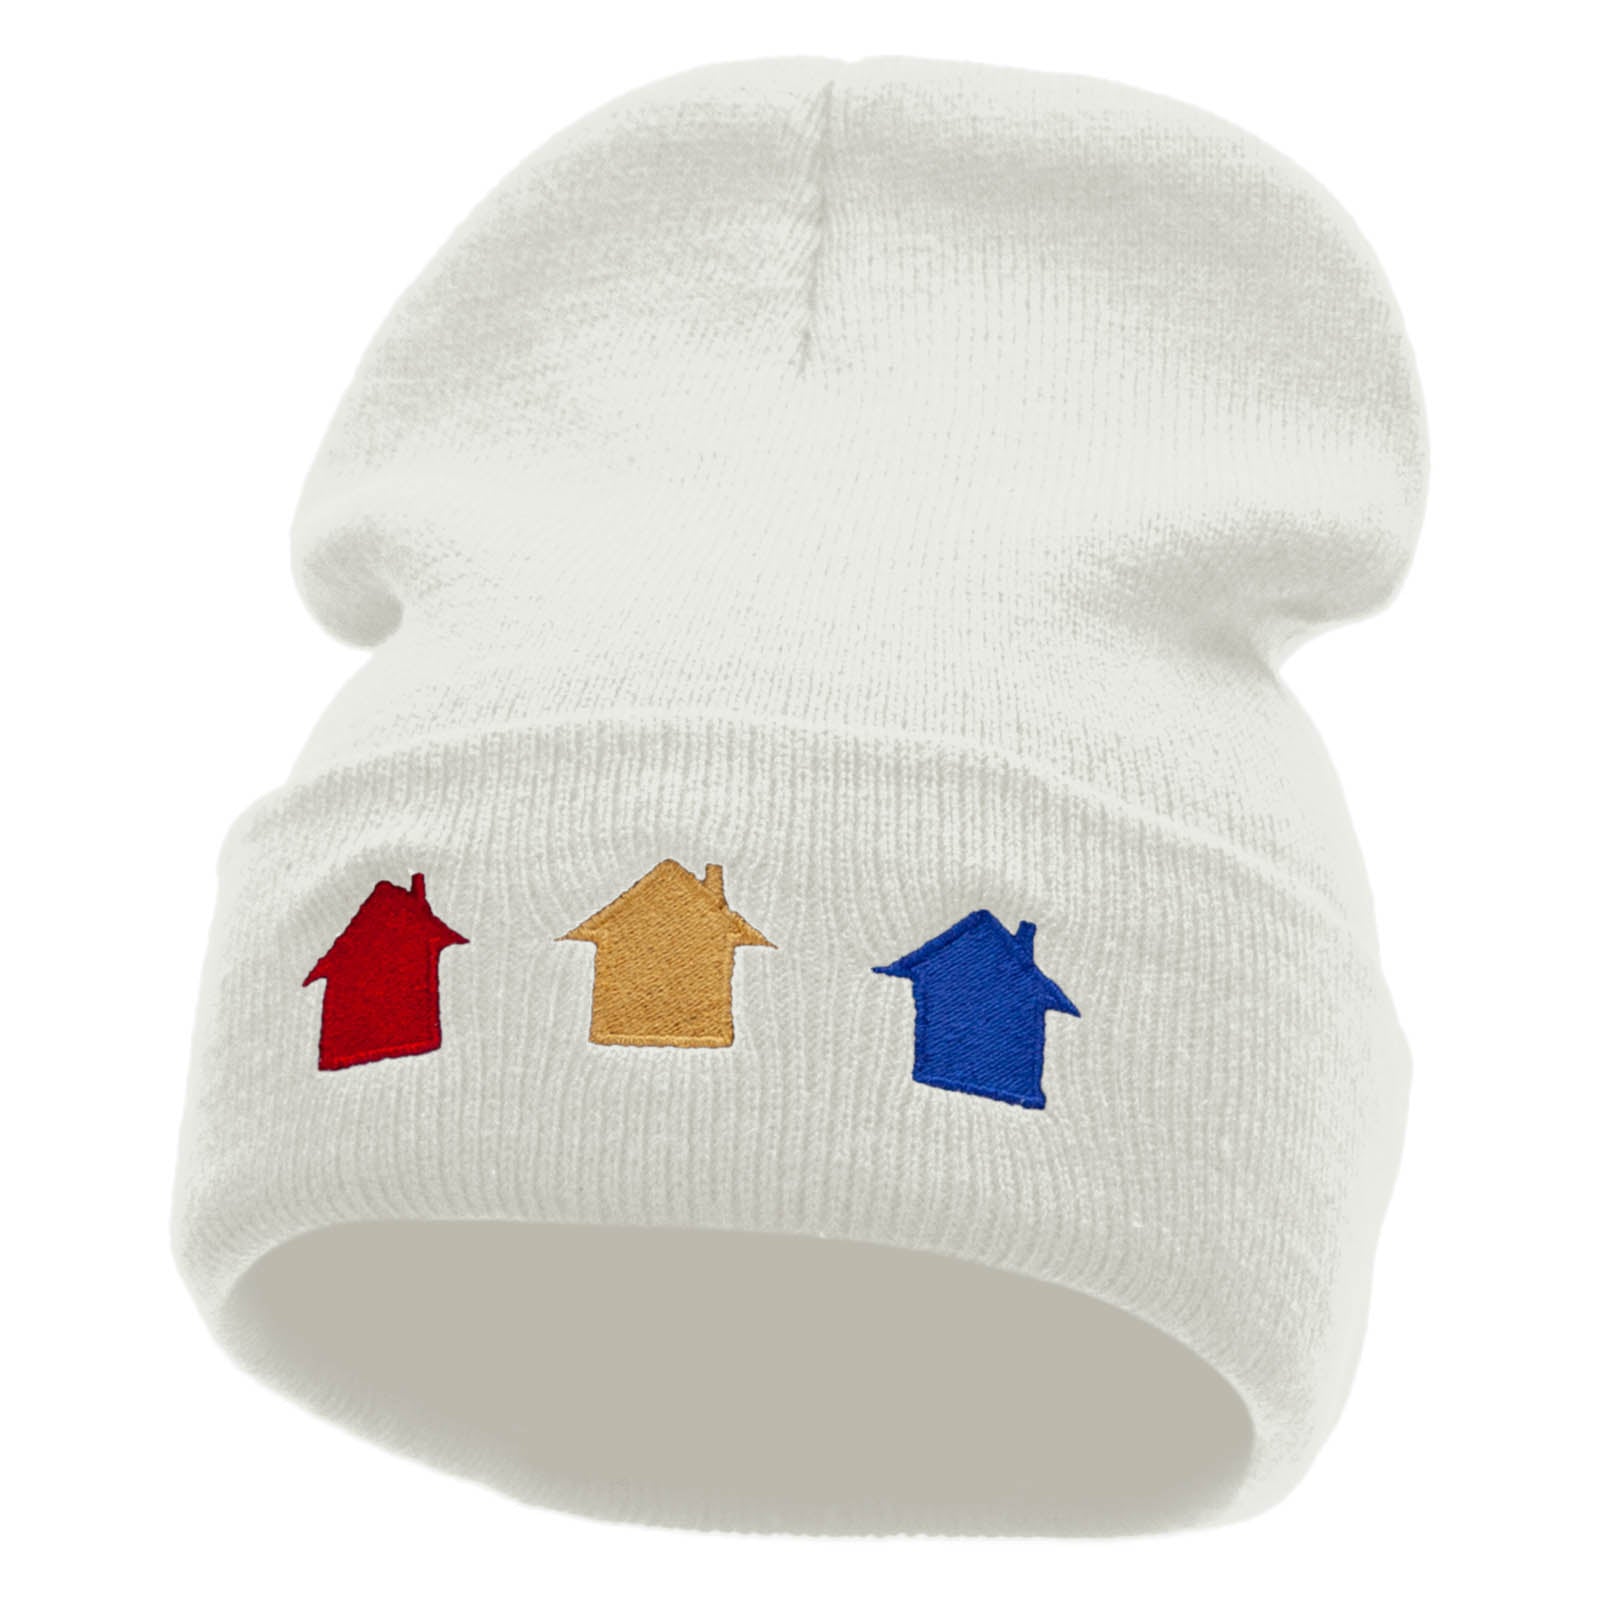 Monopoly Houses Embroidered 12 inch Acrylic Cuffed Long Beanie - White OSFM